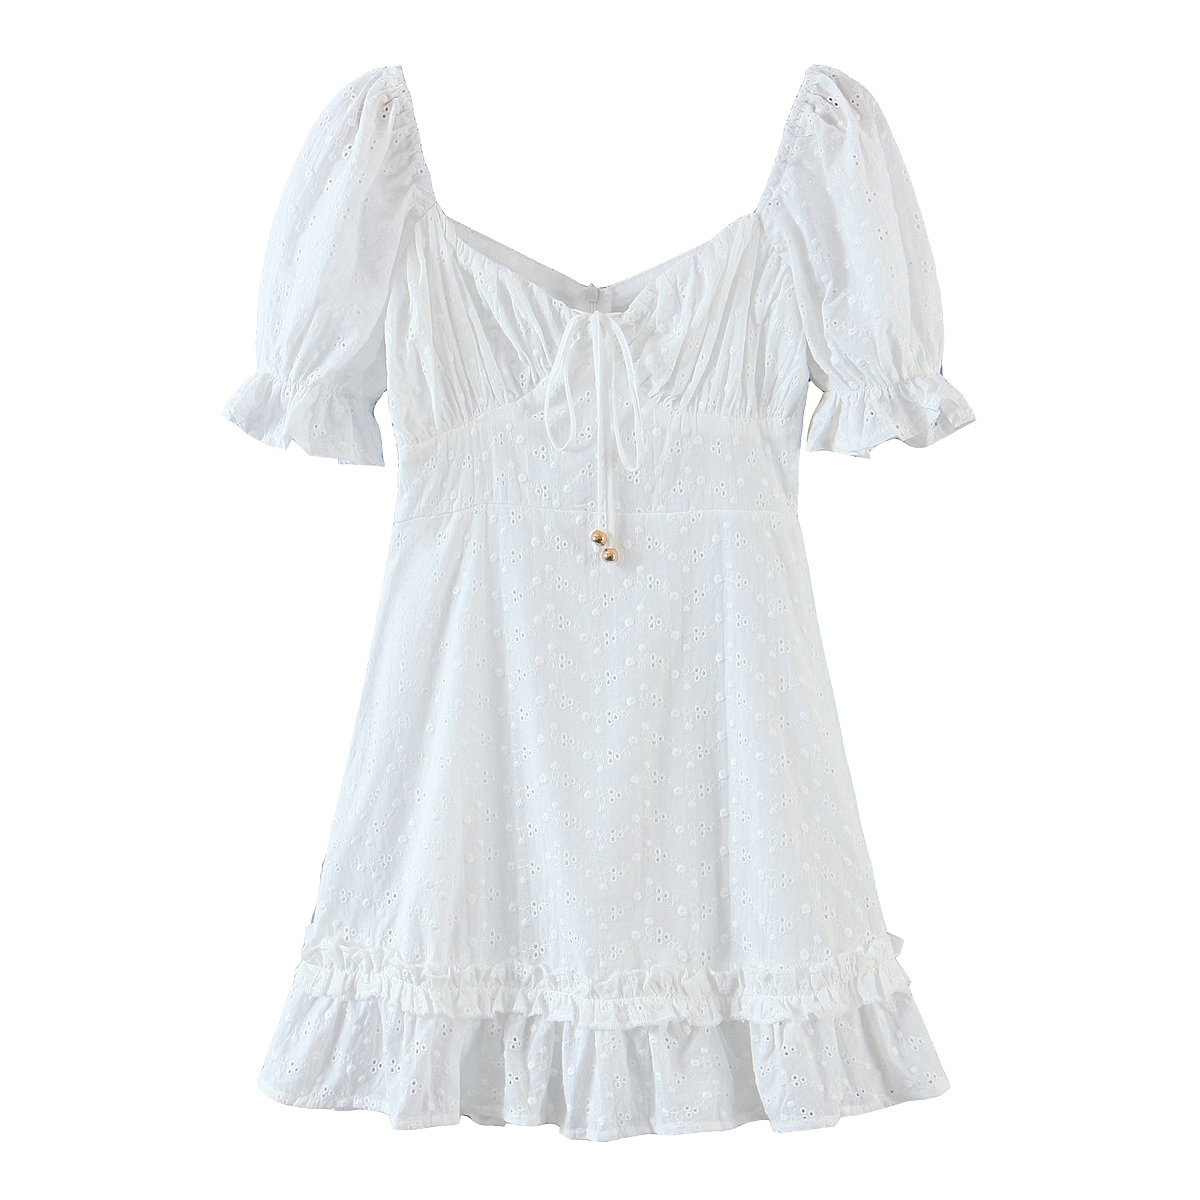 Short sleeve dress women vintage embroidered dresses summer ruffle dress slim mini dress hollow out lace up dresses white alx